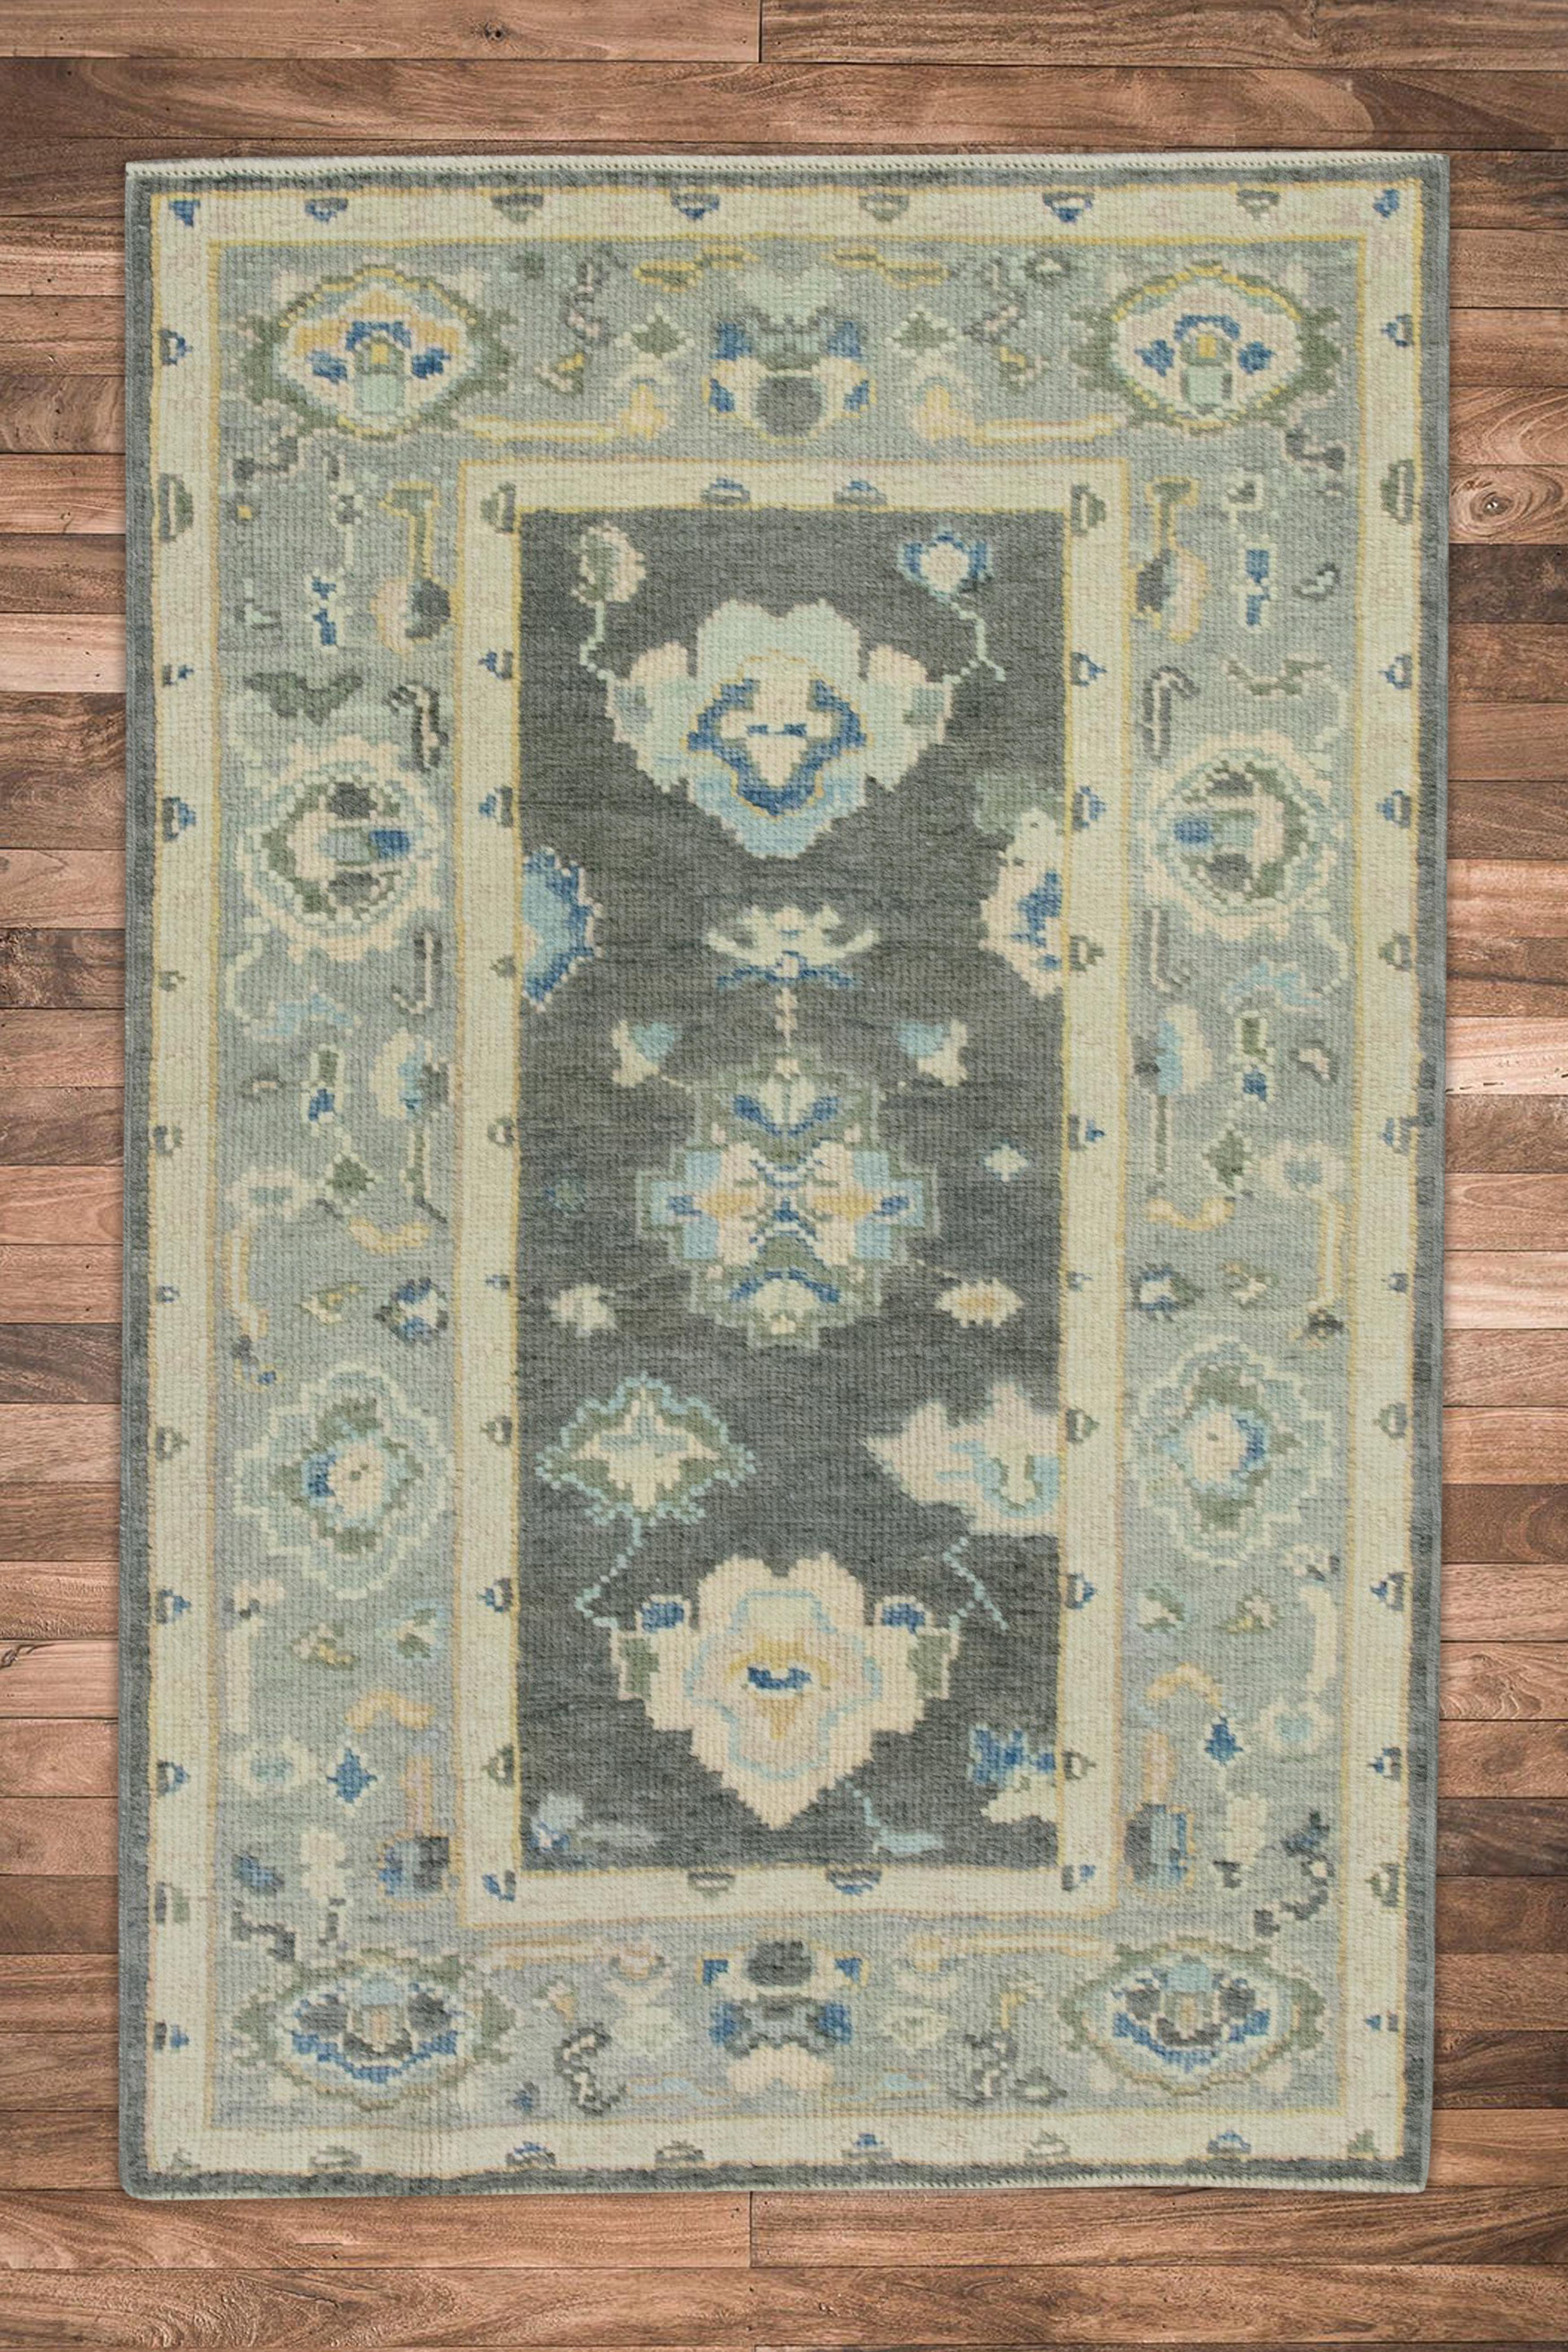 Contemporary Charcoal & Blue Floral Design Handwoven Wool Turkish Oushak Rug 2'11